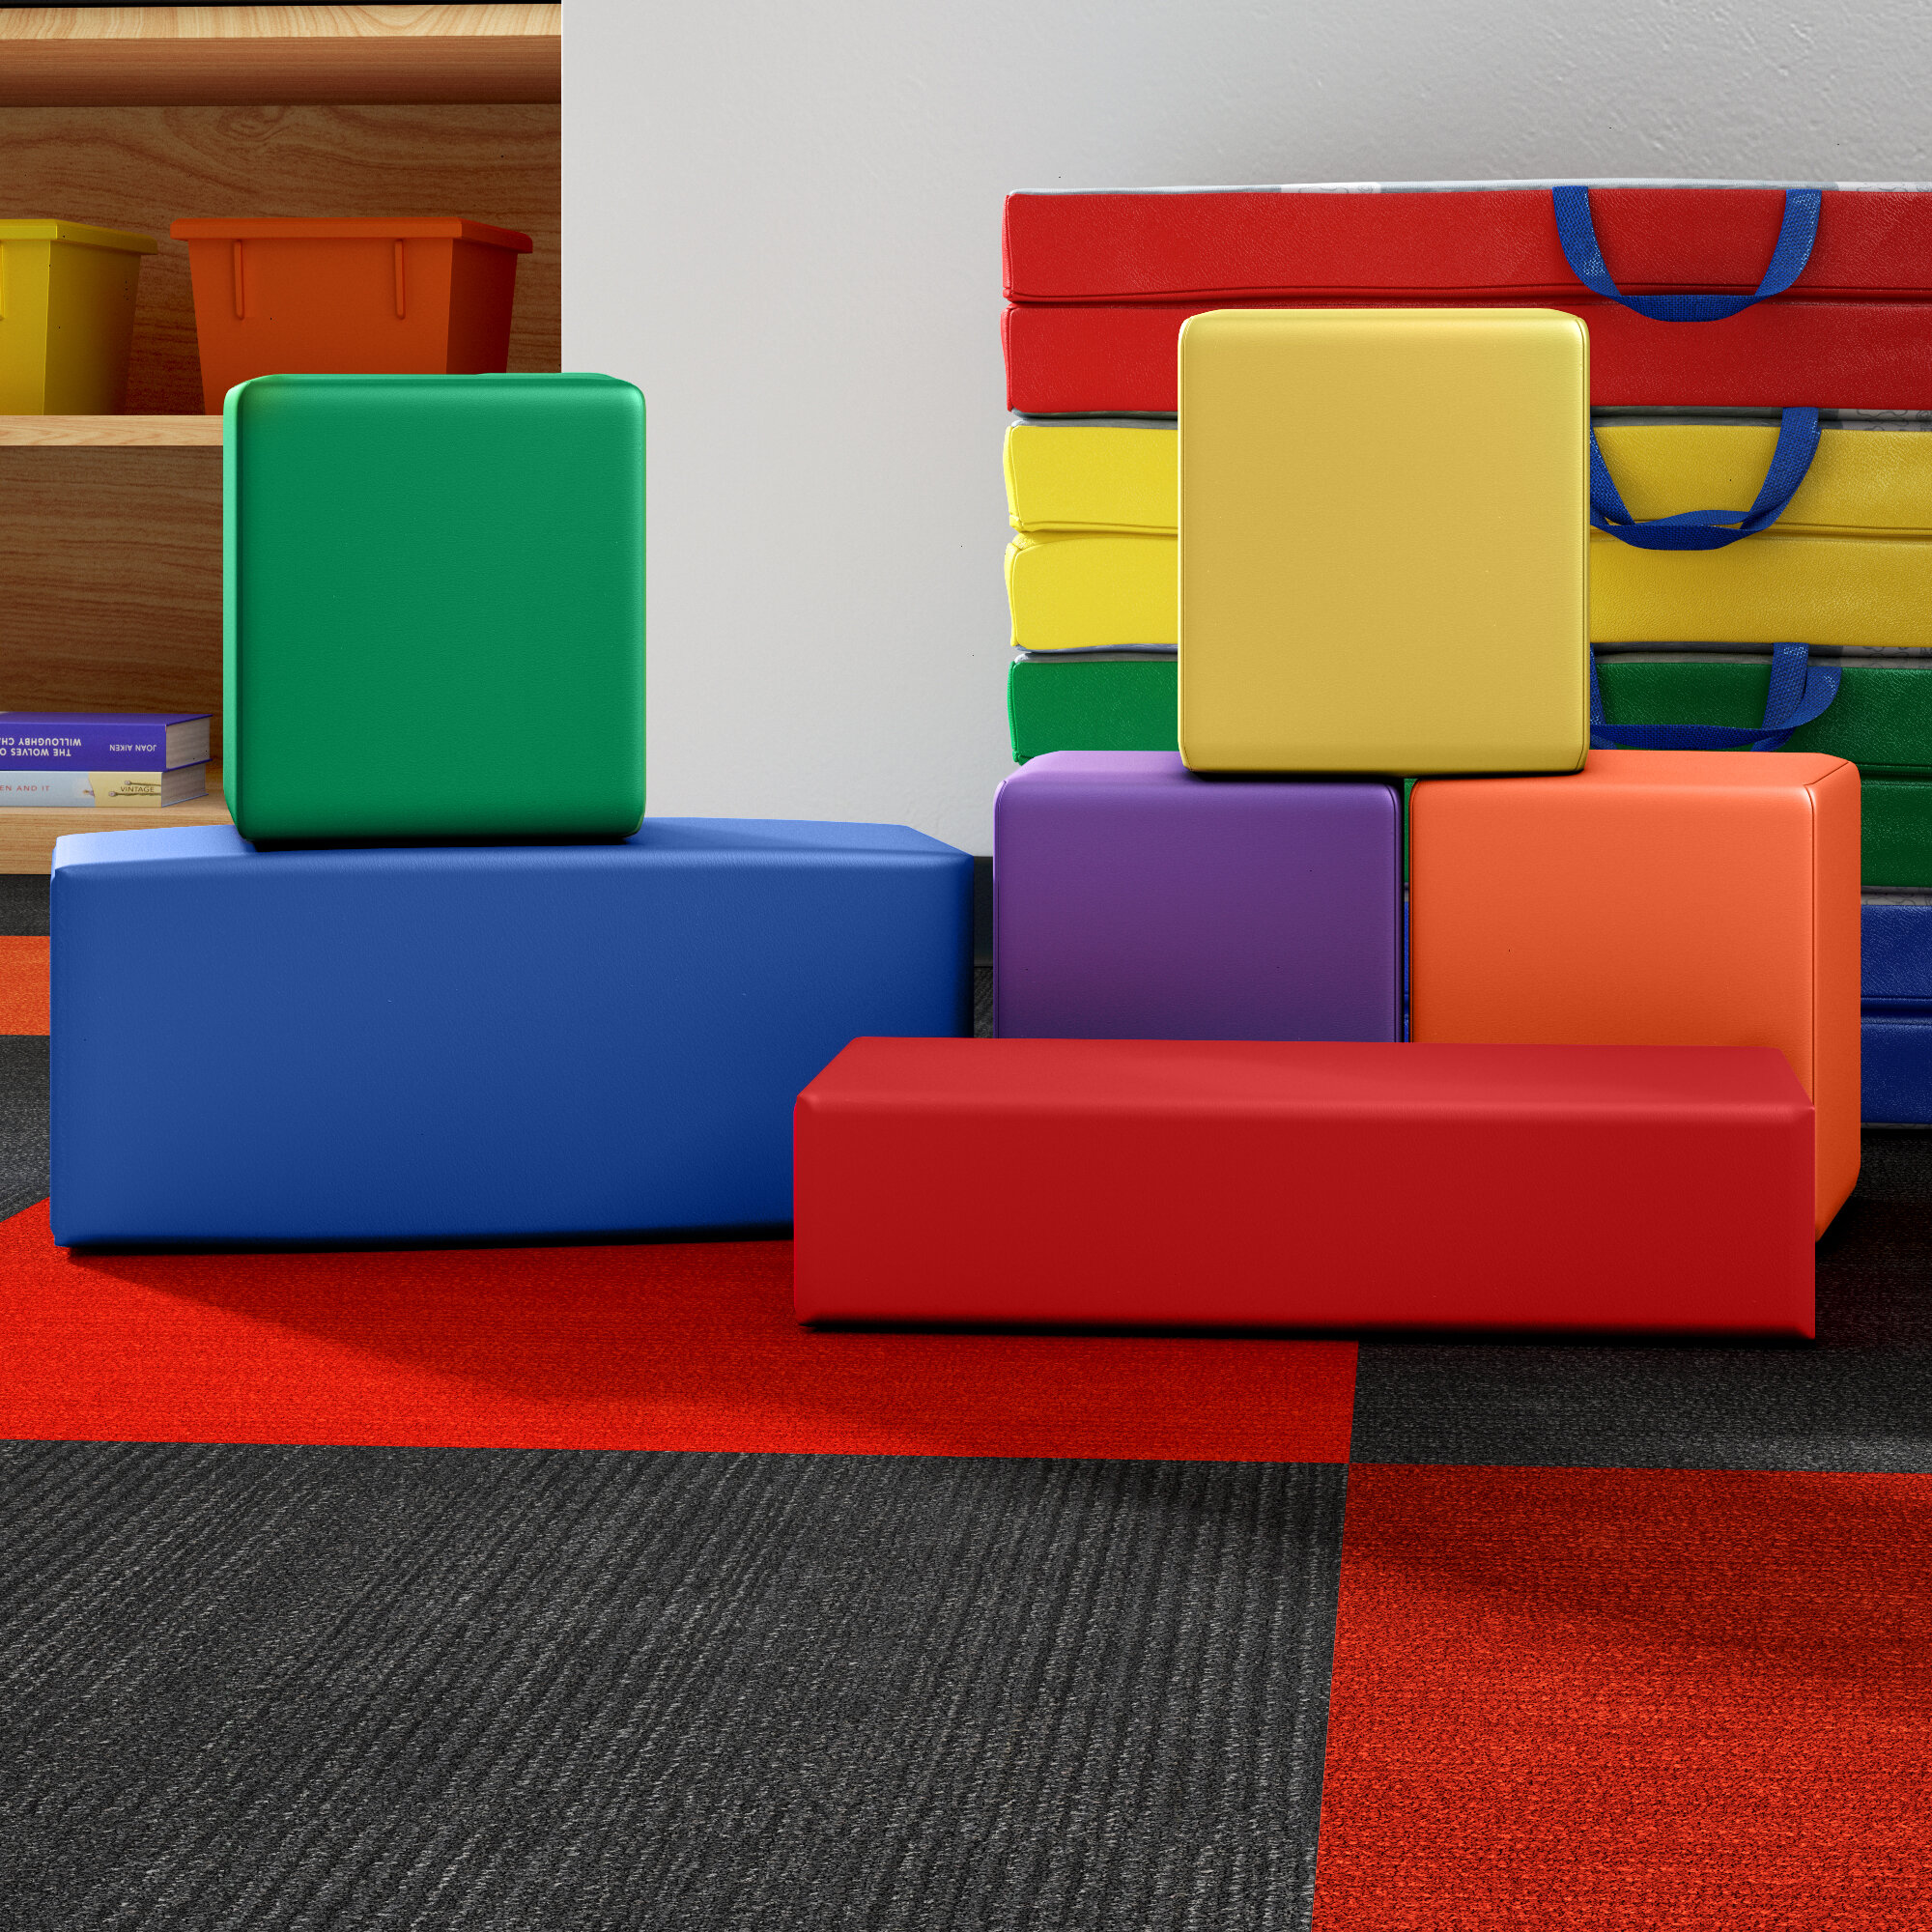 Factory Direct Partners SoftScape Ring Around Soft Modular Seating Set for Toddlers and Kids - Contemporary Playrooms Colorful Flexible Seating for Classrooms 6-Piece Set Daycares 